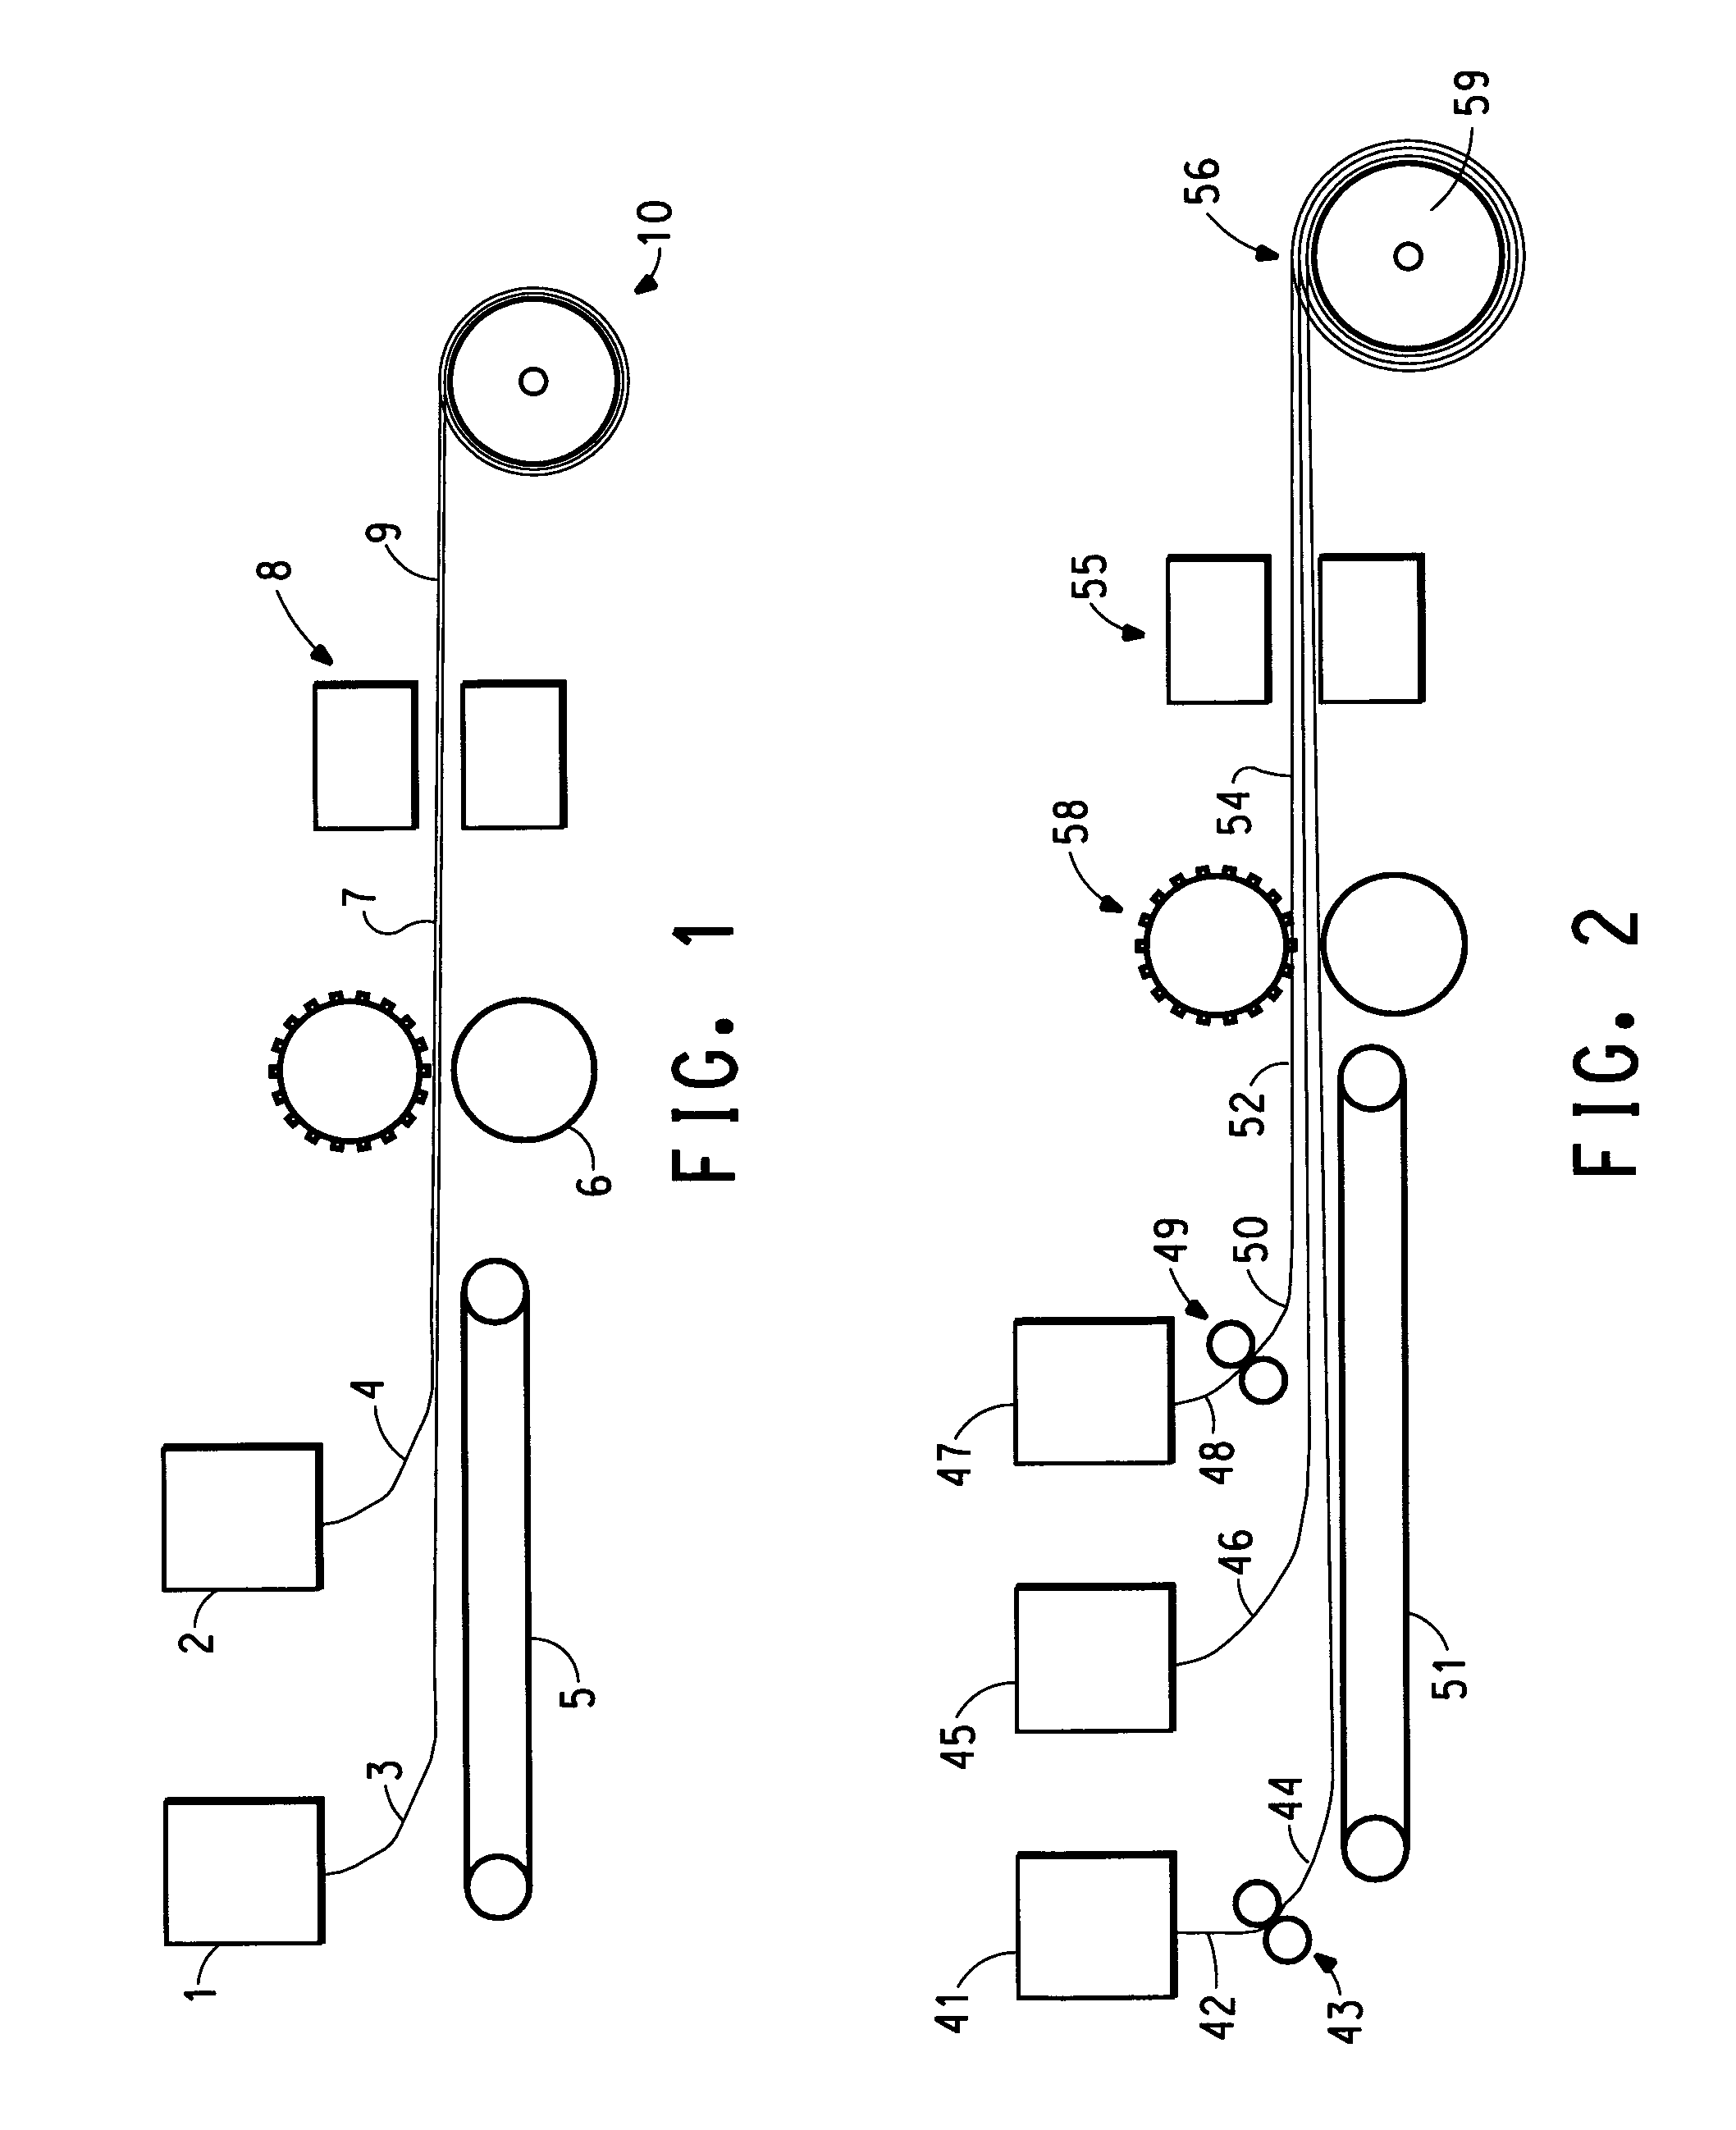 Stretchable composite sheets and processes for making